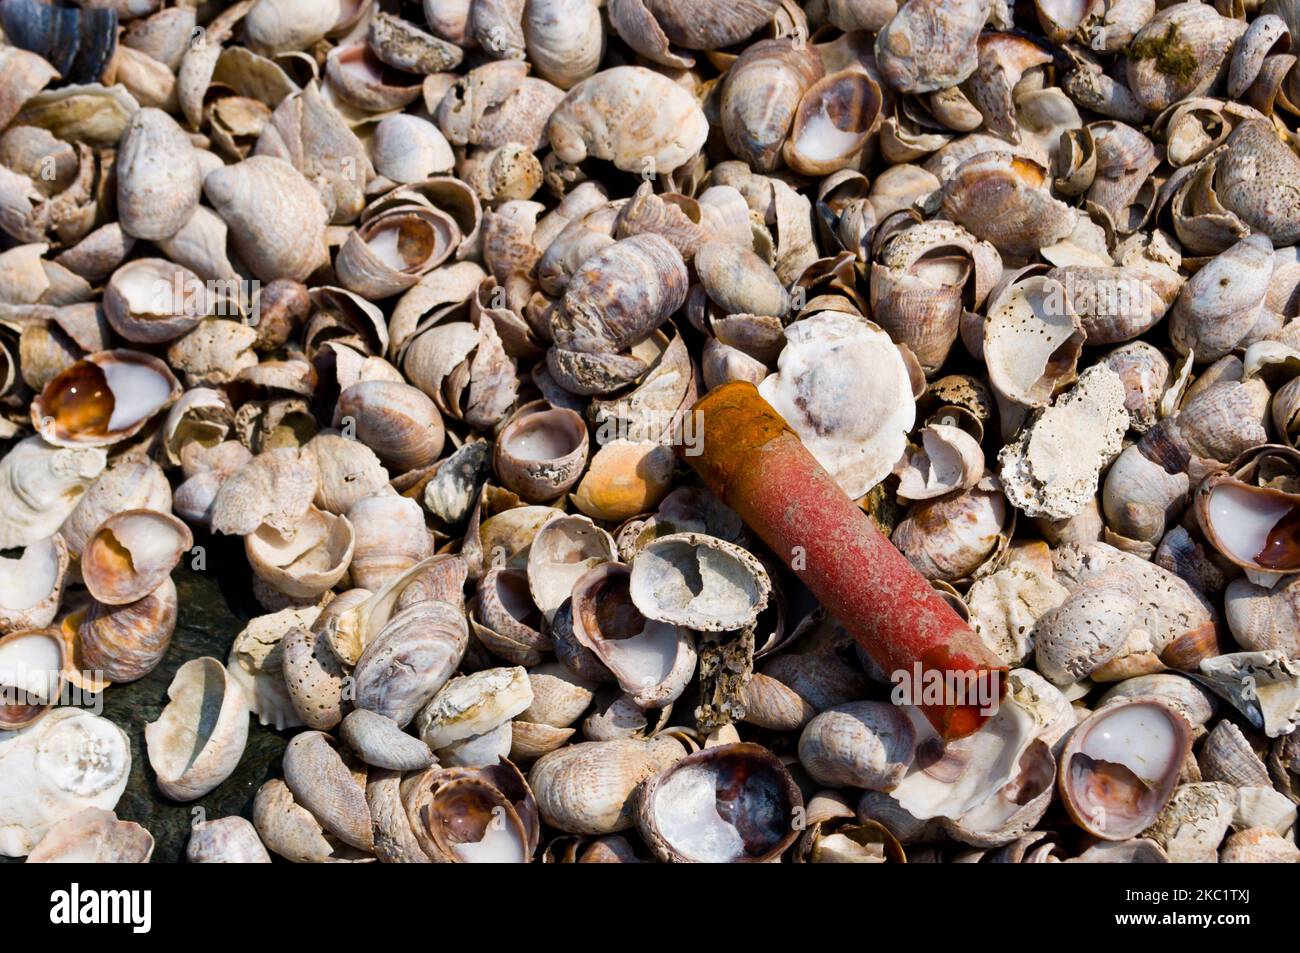 A closeup of a small red pipe on the heap of empty seashells. Stock Photo